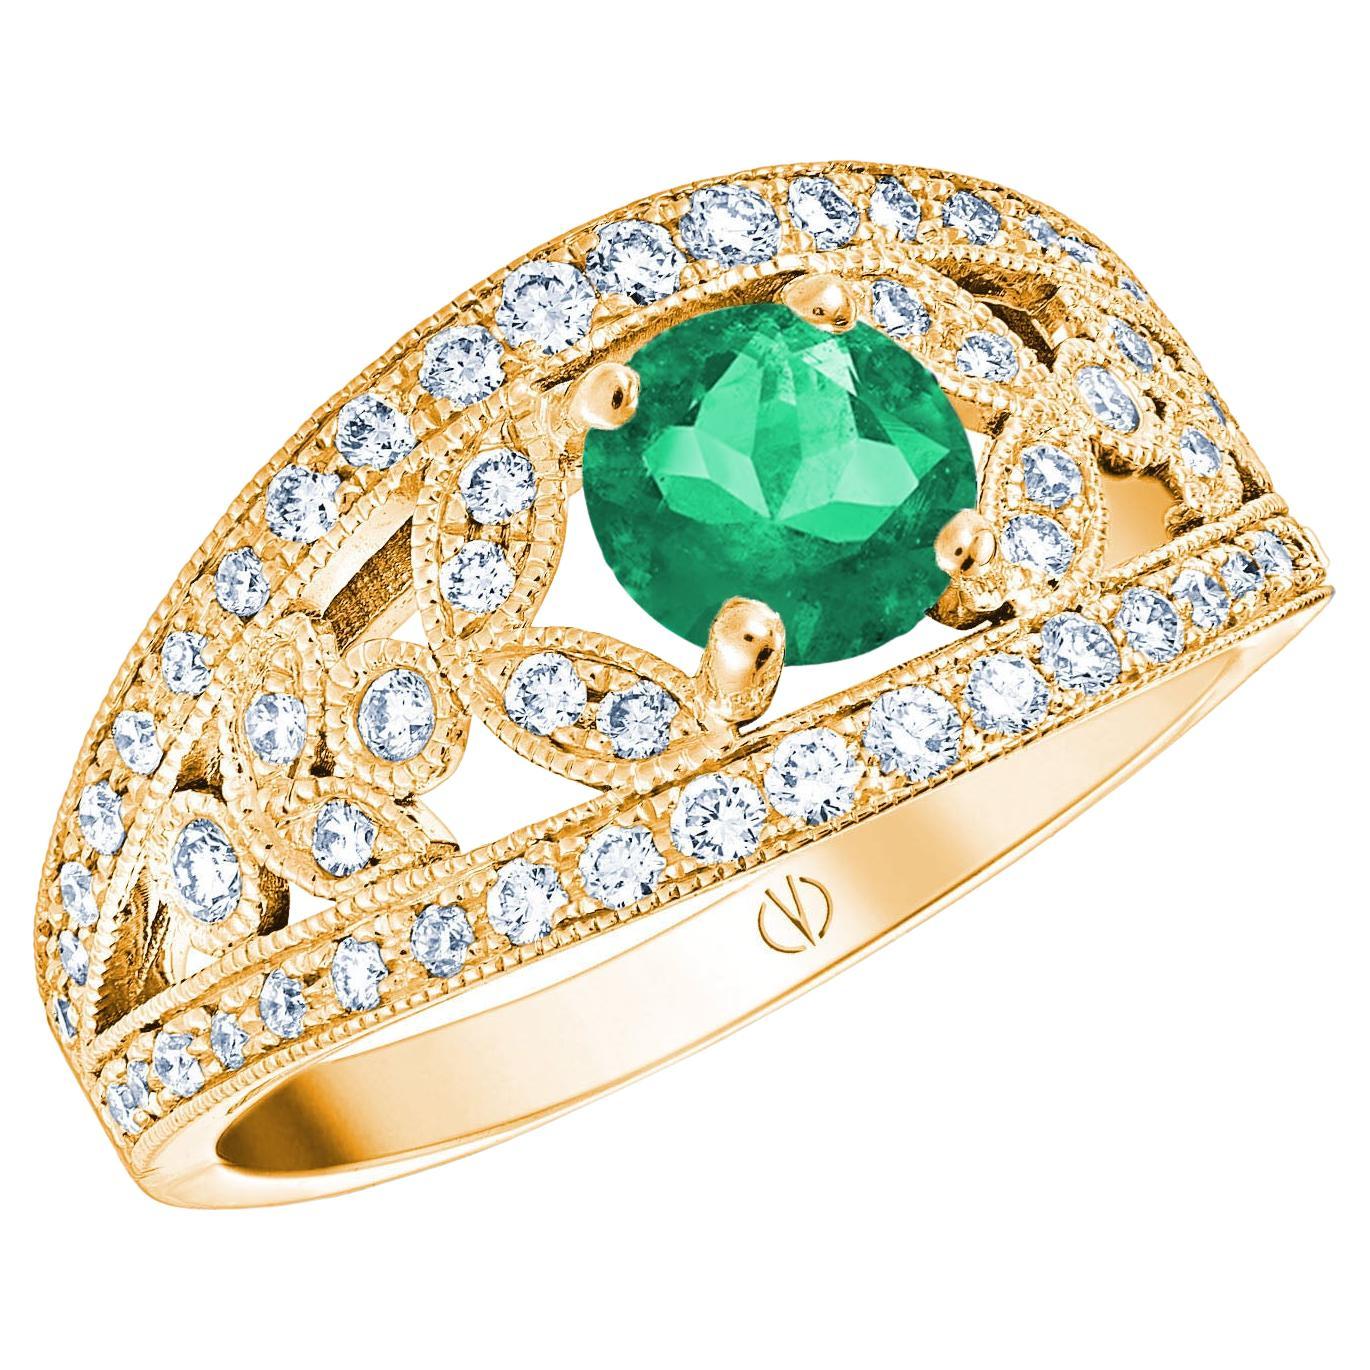 For Sale:  18k Yellow Gold Laurel Leaf Design 0.85 Ct Vivid Green Emerald Ring with Diamond